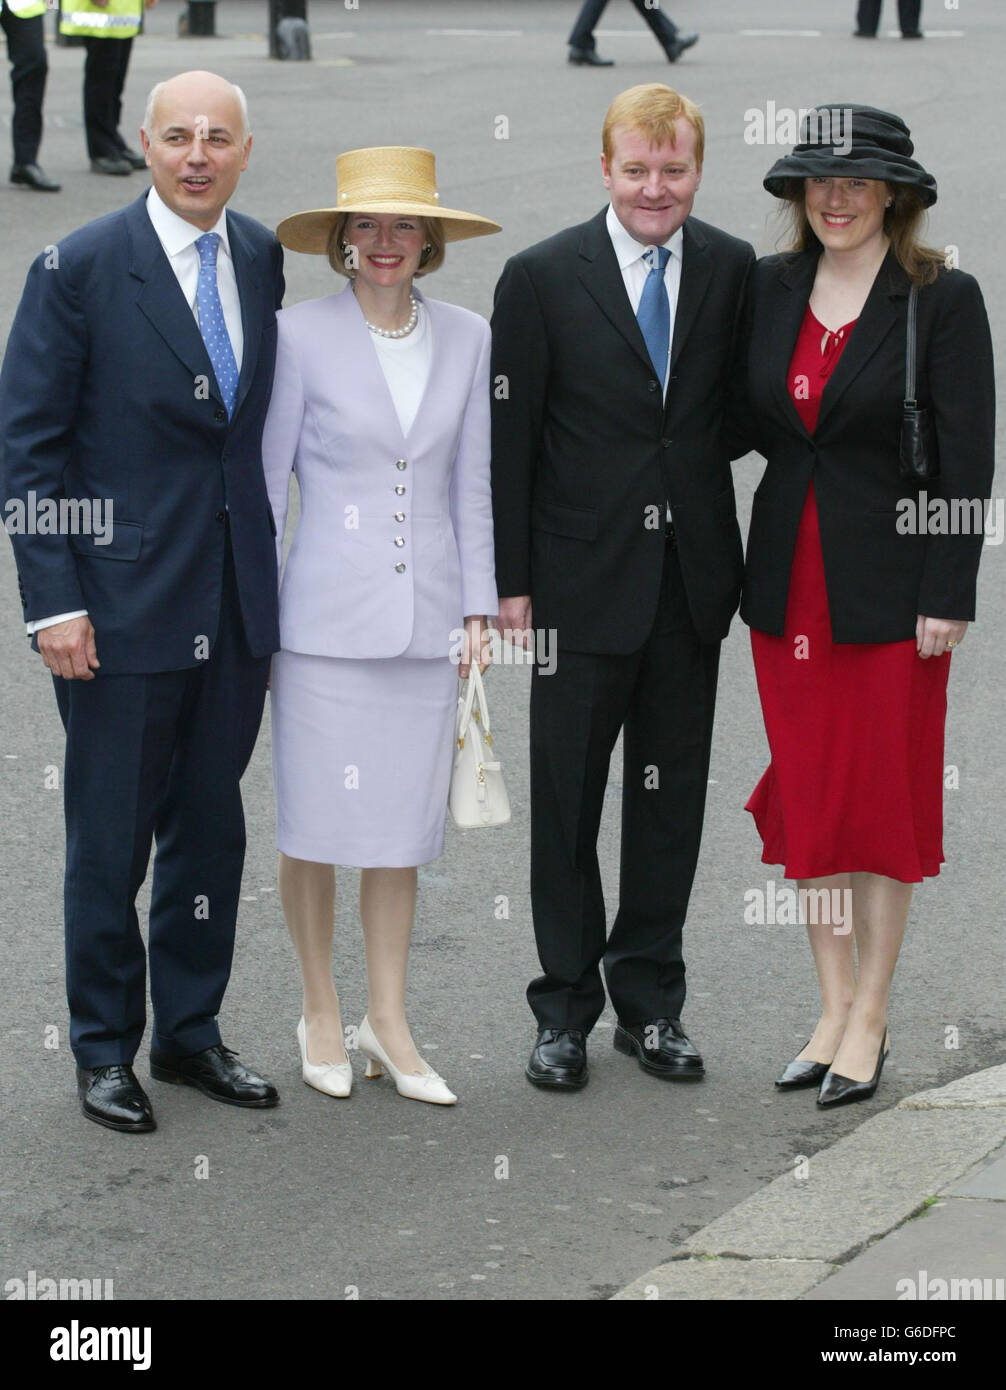 Iain Duncan Smith (left), leader of the Conservative Party and his wife Betsy arrive with the leader of the Liberal Democrat Party, Charles Kennedy and his wife, Sarah, at Westminster Abbey for a service to celebrate the 50th anniversary of the coronation. * of Queen Elizabeth II. 16 senior members of the Royal family and other VIPs were among the congregation with some 1,000 members of the public, including 34 'Coronation babies' born on June 2, 1953 and celebrating their 50th birthdays. In the afternoon, The Queen is attending a children's tea party in the garden of Buckingham Palace. Stock Photo